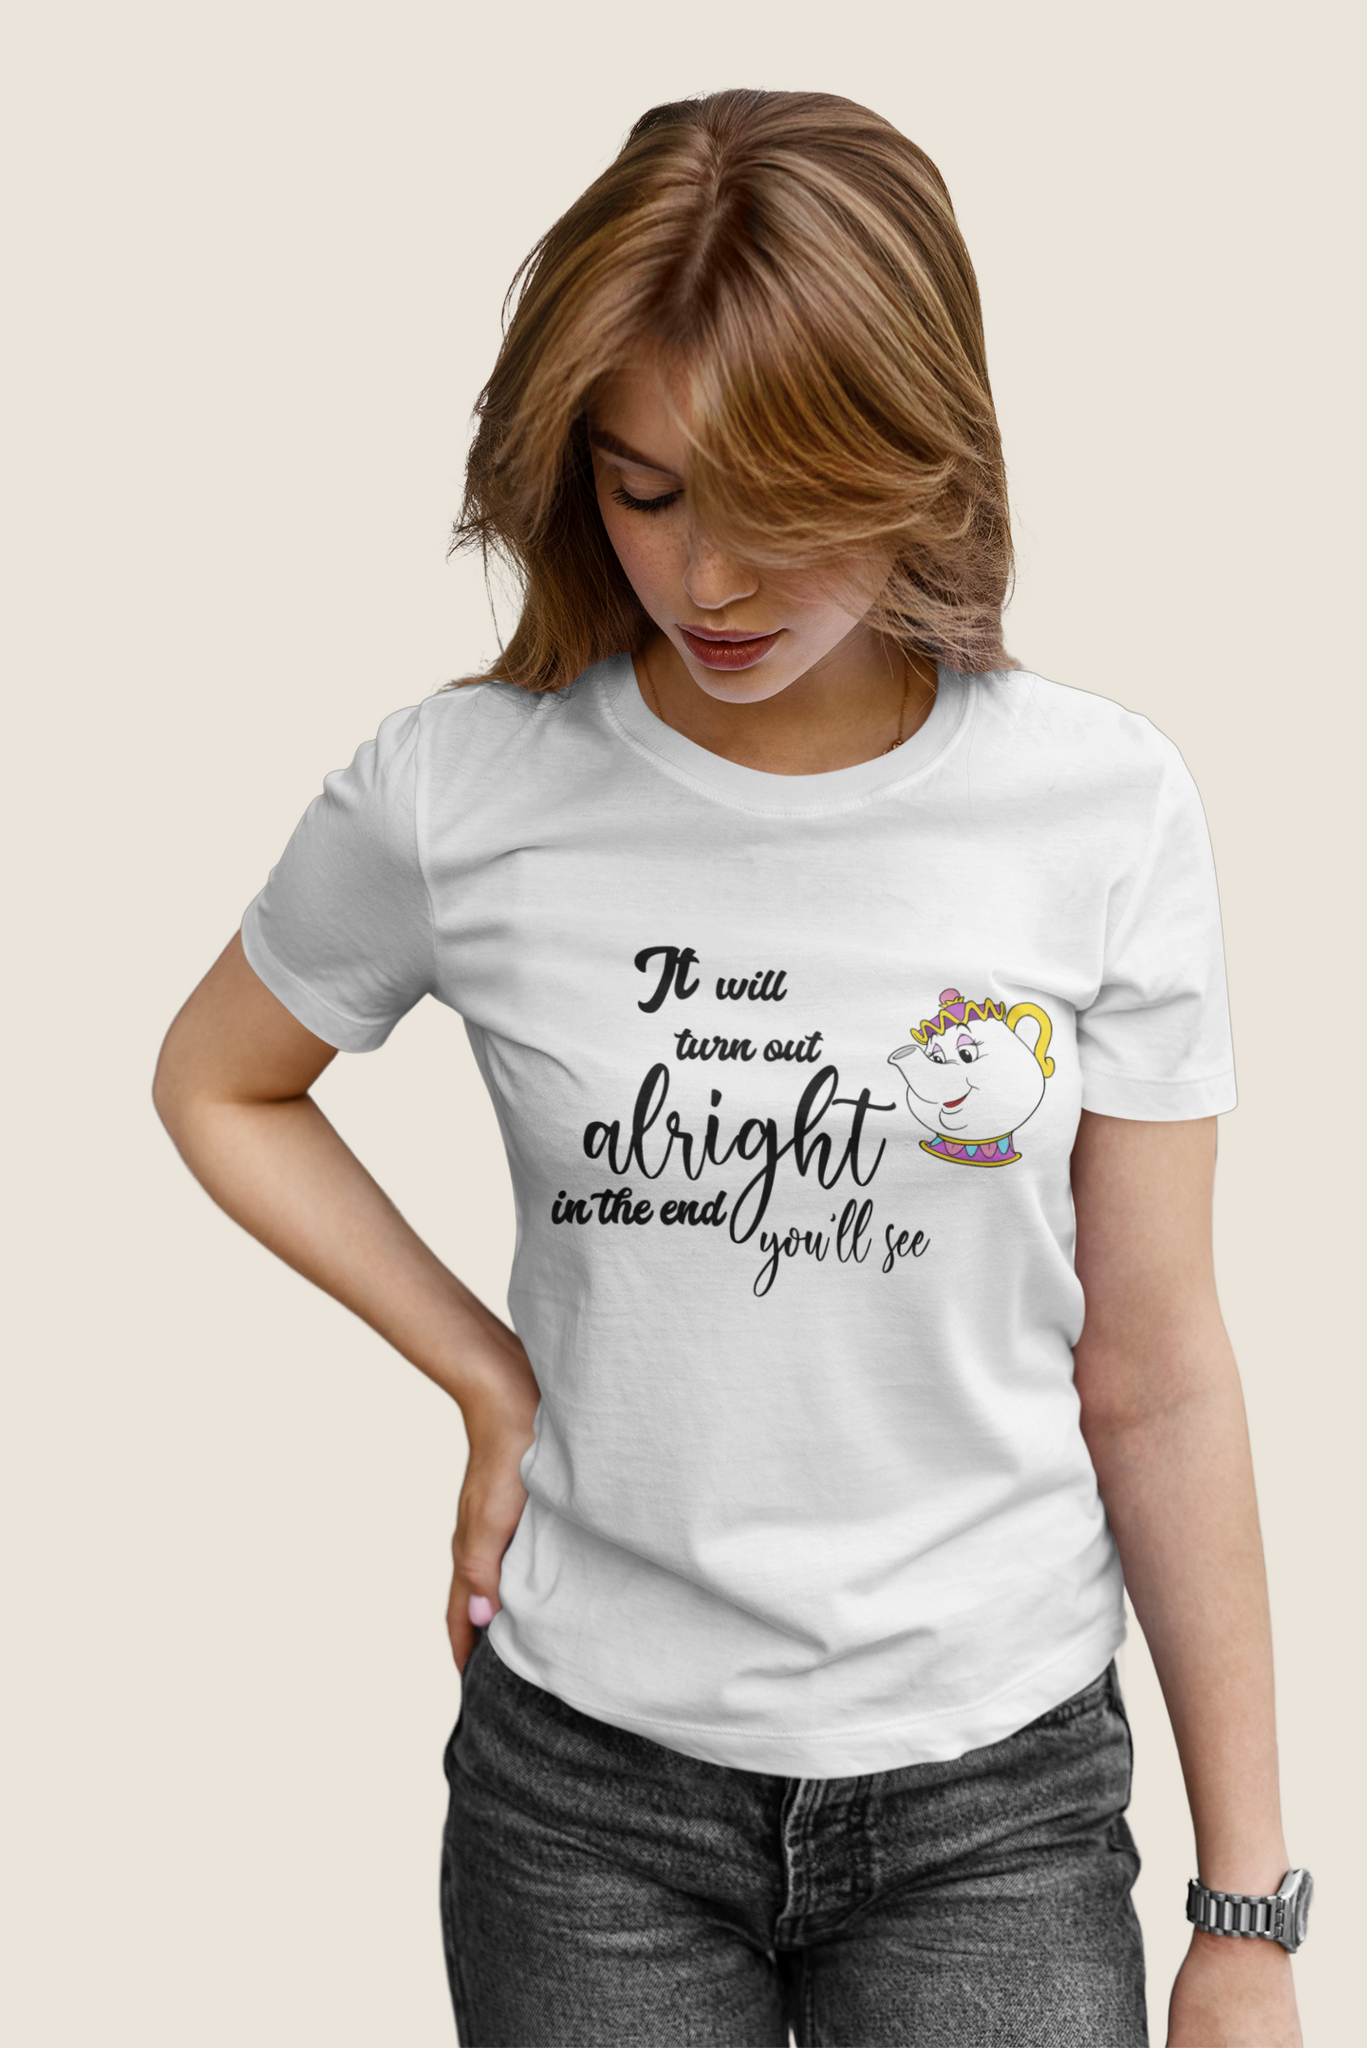 Disney Beauty And The Beast T Shirt, It Will Turn Out Alright In The End Youll See Tshirt, Mrs Potts T Shirt